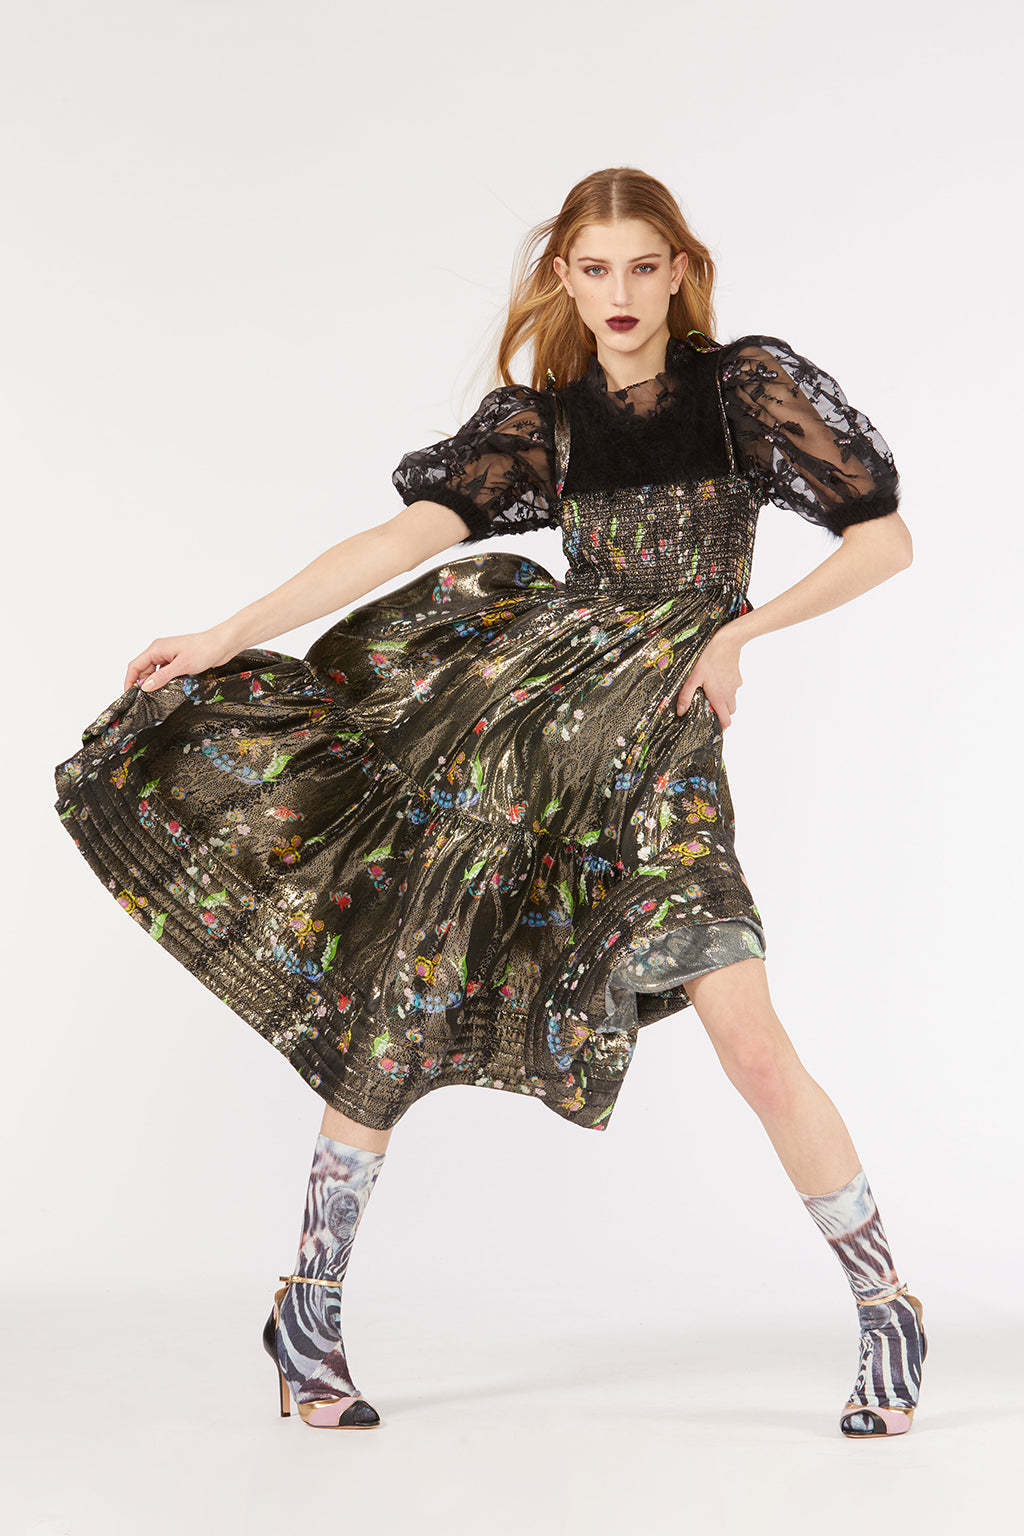 Cynthia Rowley Fall 2018 look 34 featuring a metallic floral tiered dress with smocking across chest and black embroidered tulle puff sleeves. 